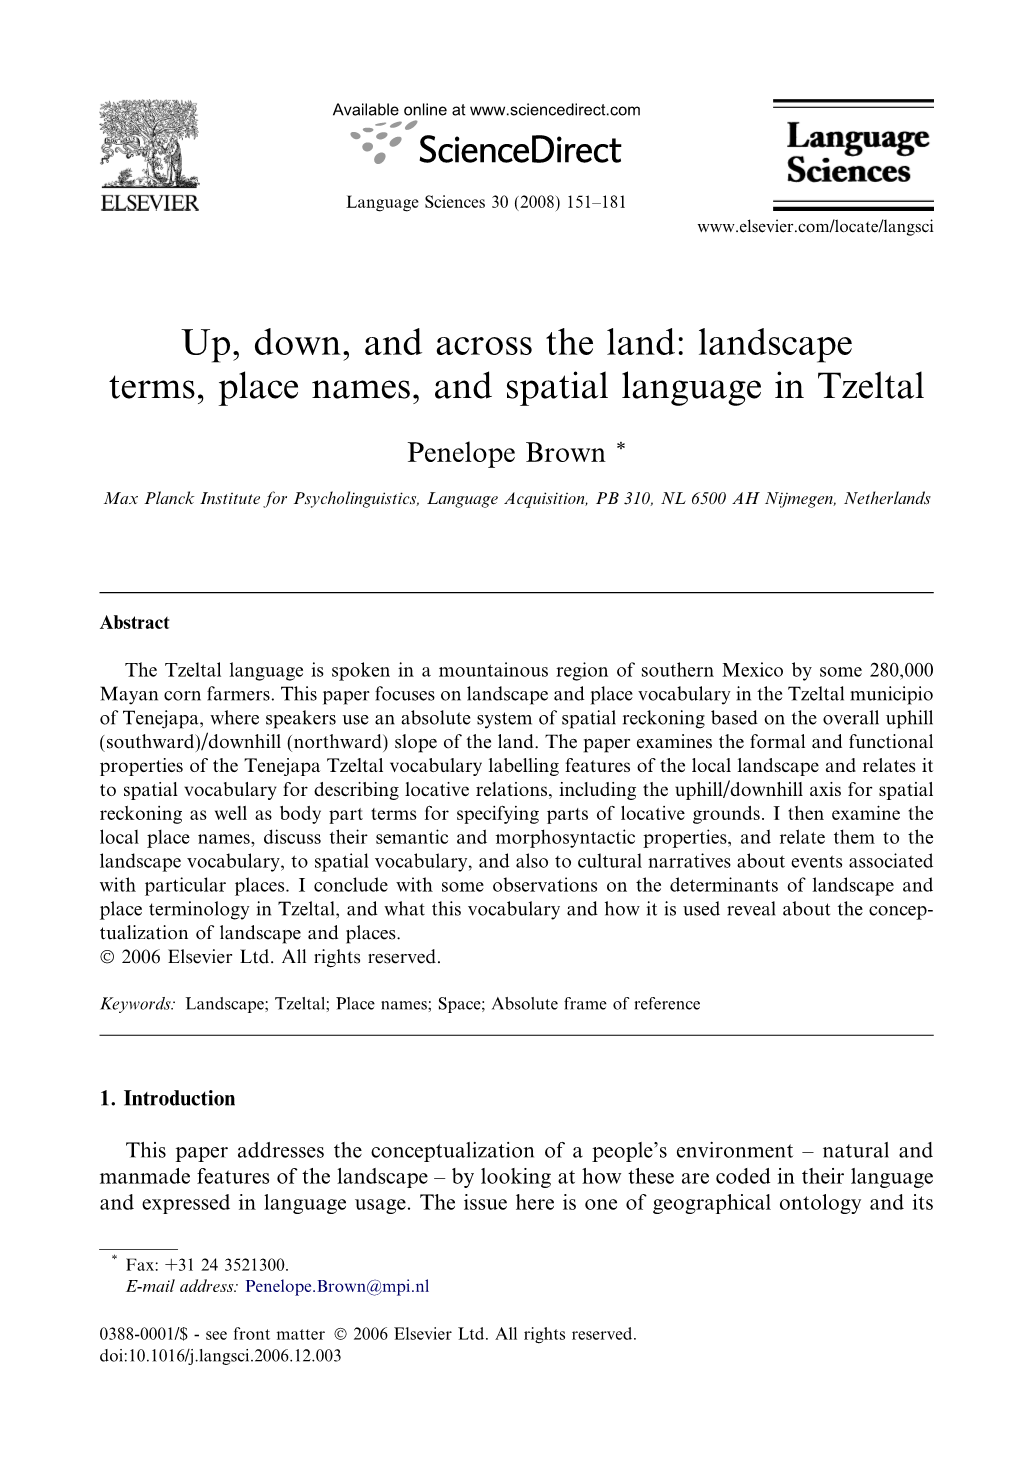 Landscape Terms, Place Names, and Spatial Language in Tzeltal